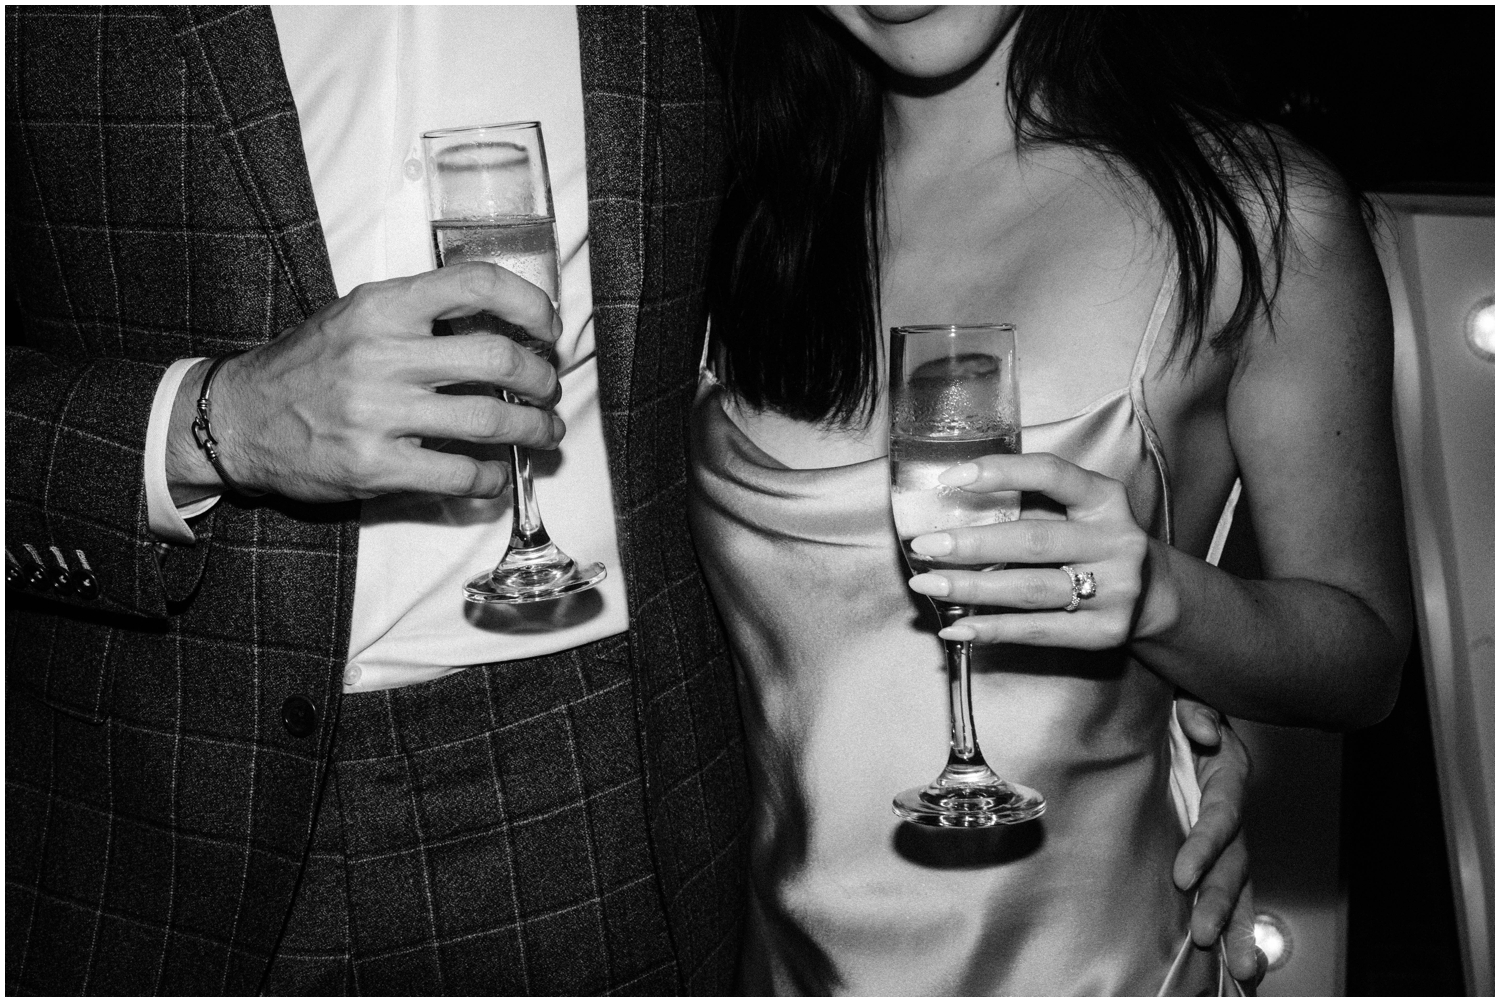 A direct flash photo shows a couple holding cocktails with an engagement ring.